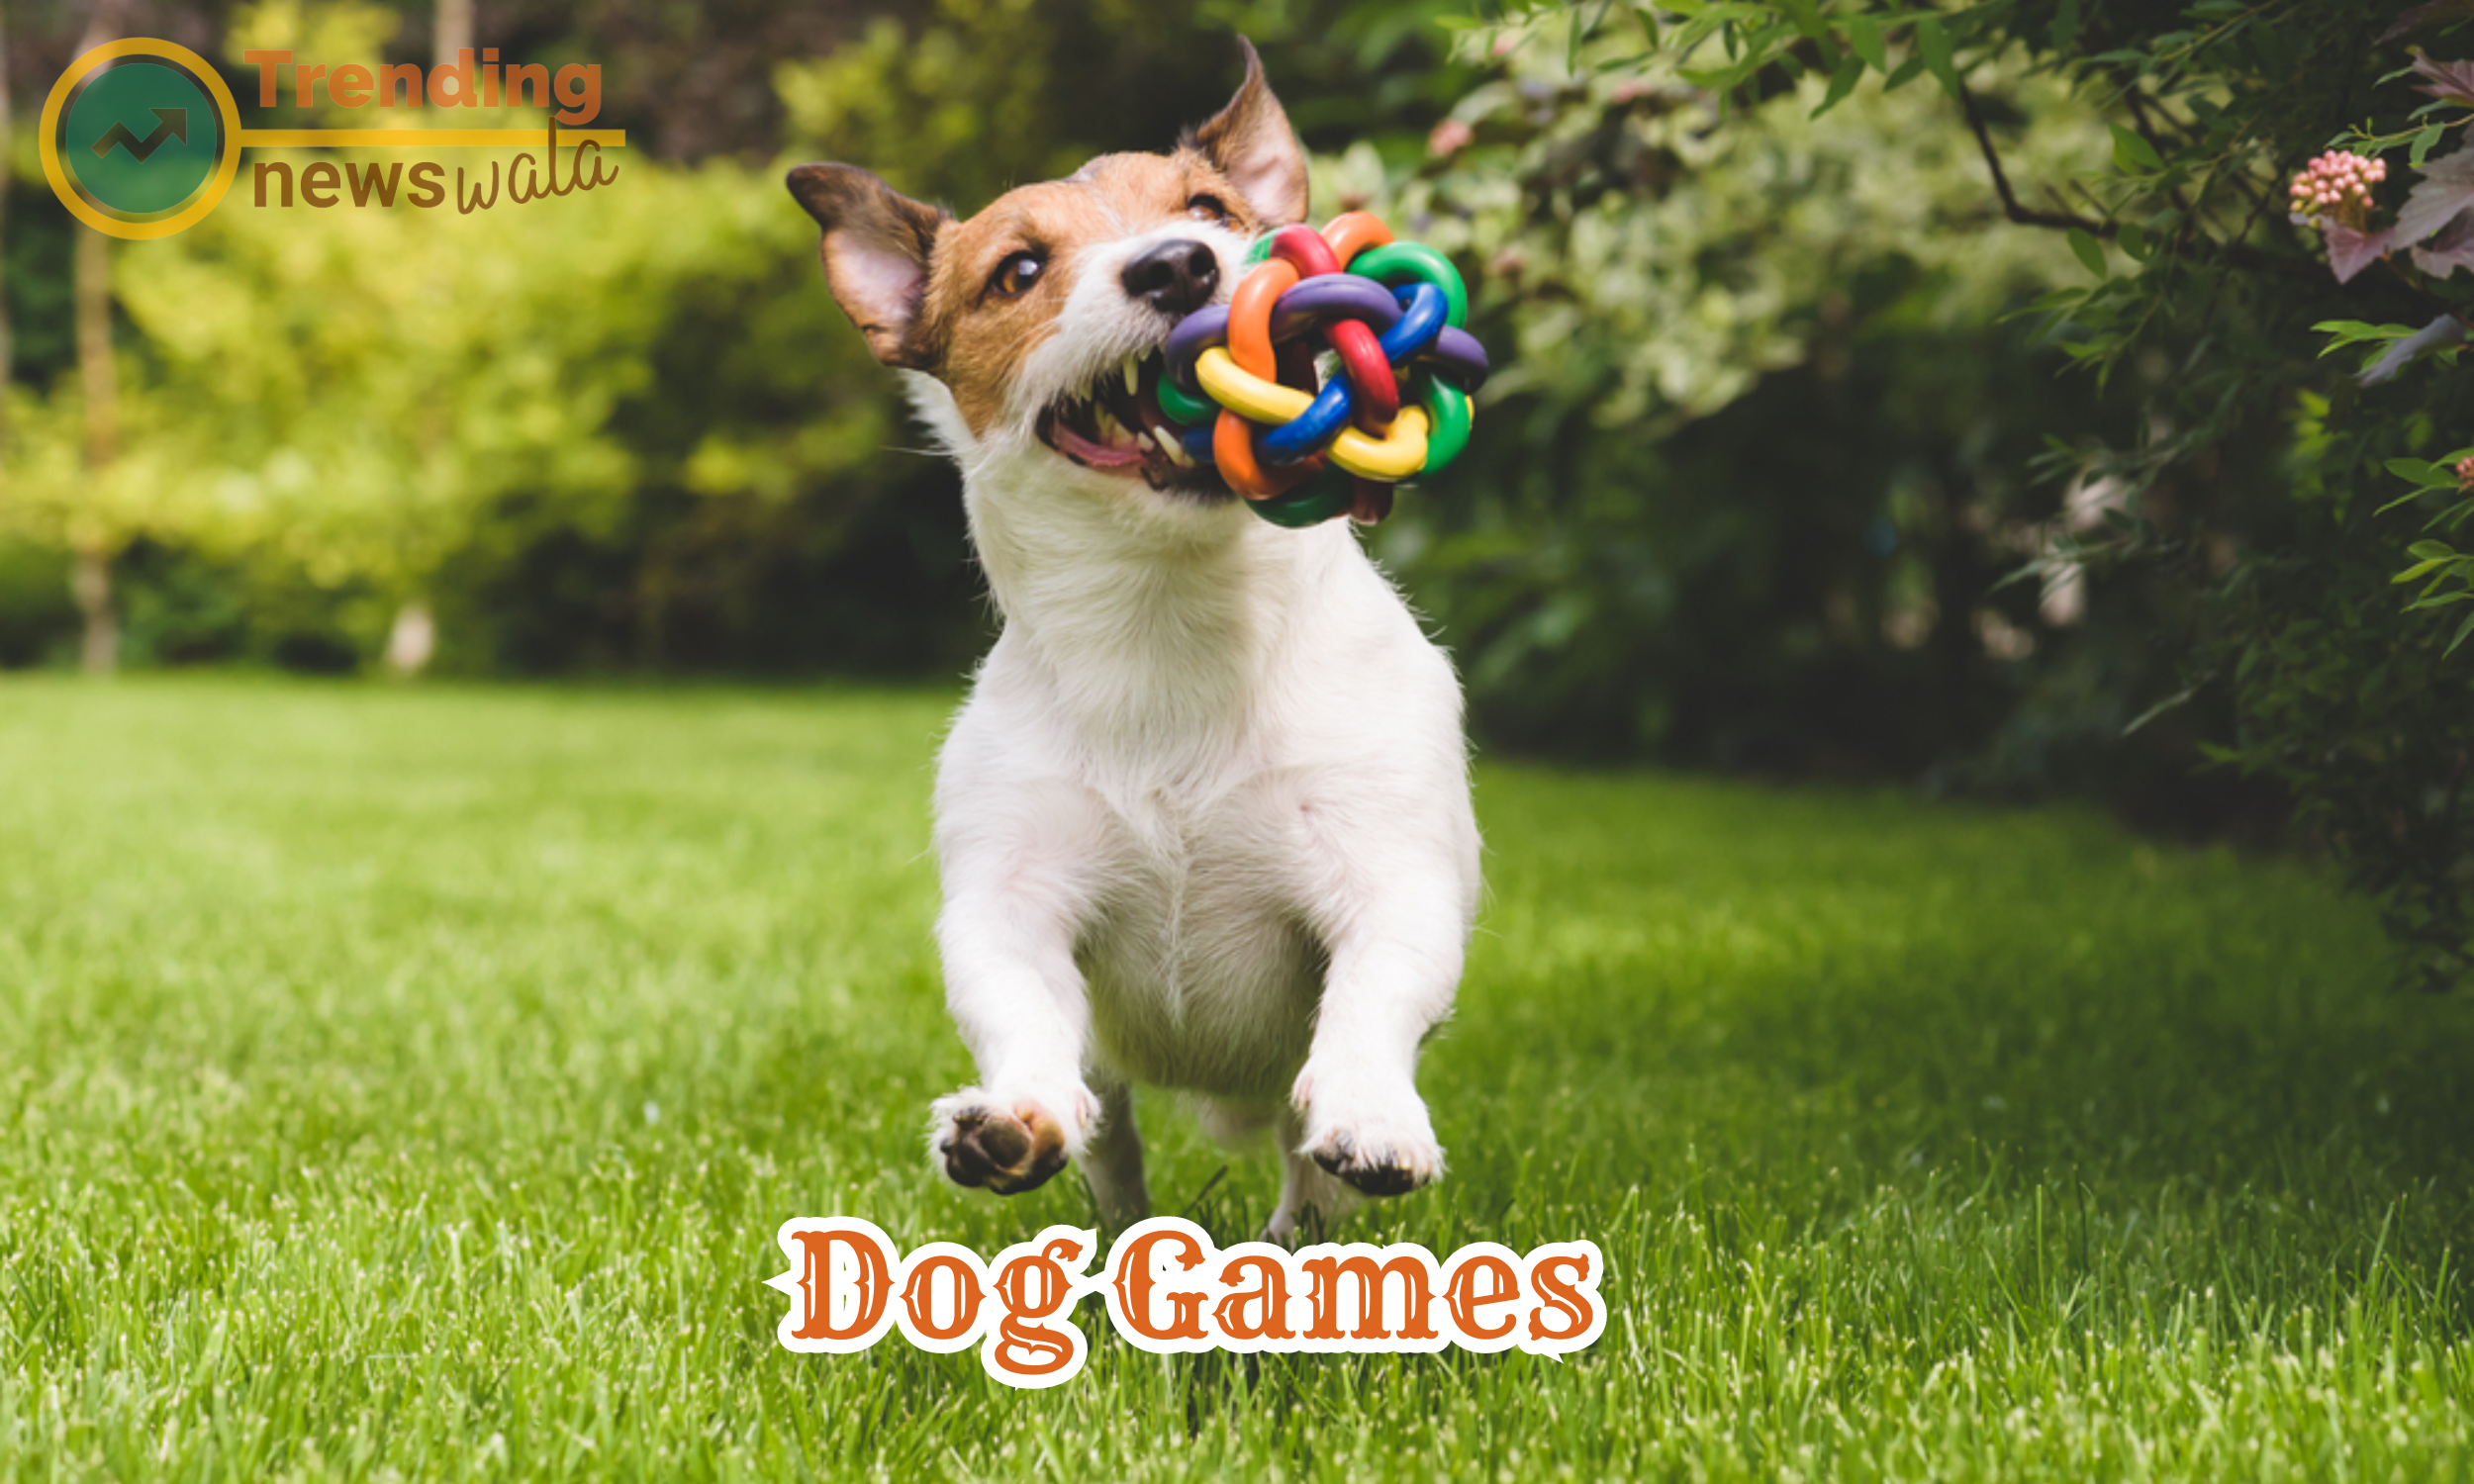 The 10 fun dog games mentioned: